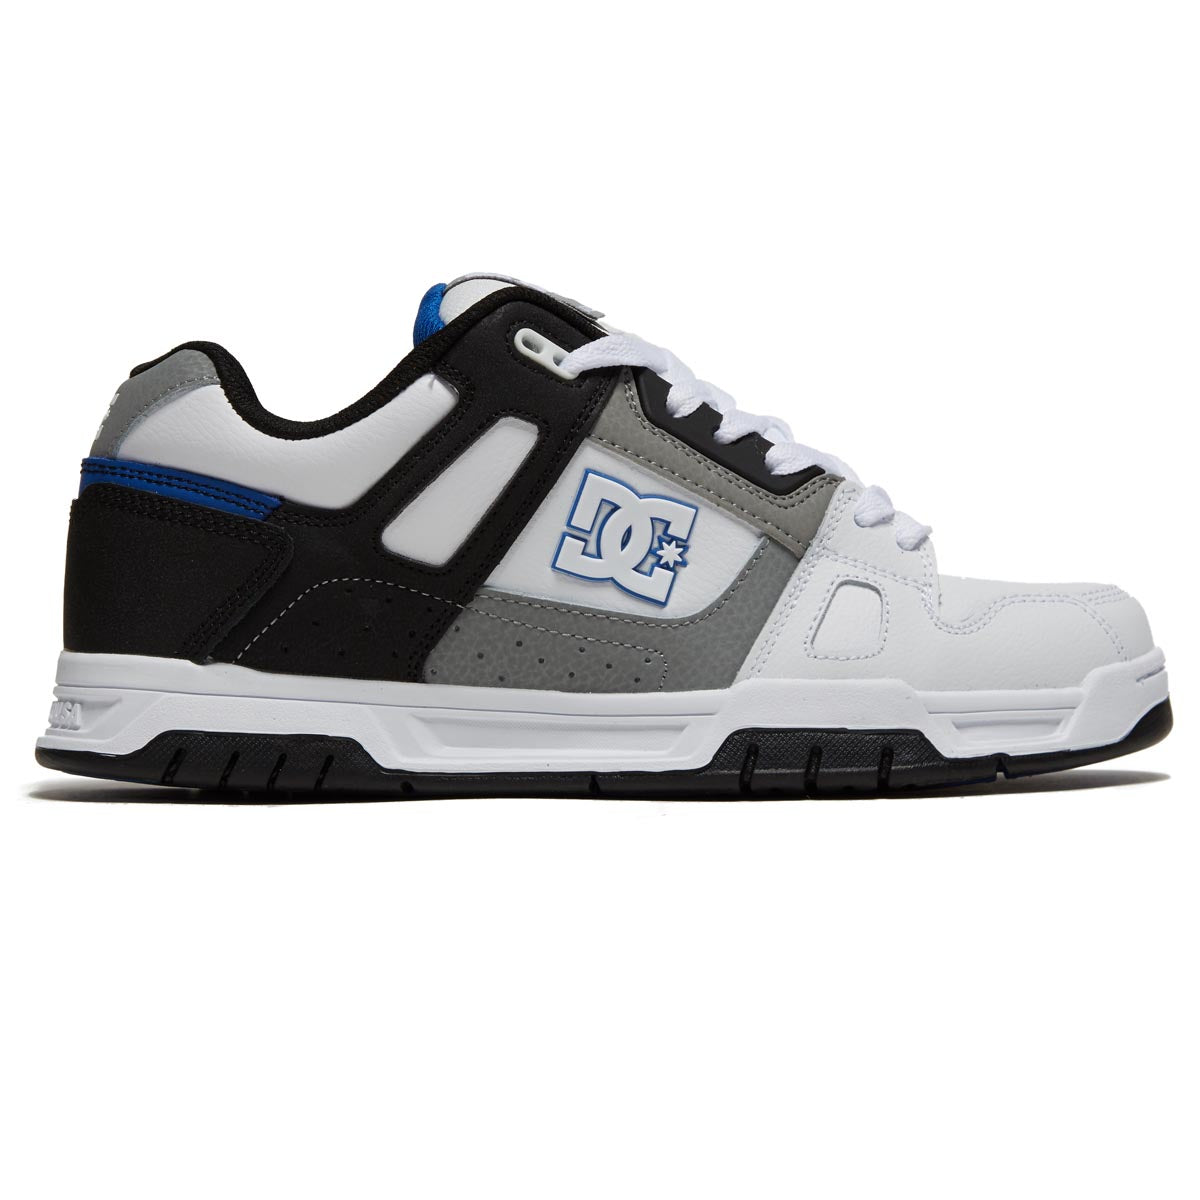 DC Stag Shoes - White/Grey image 1